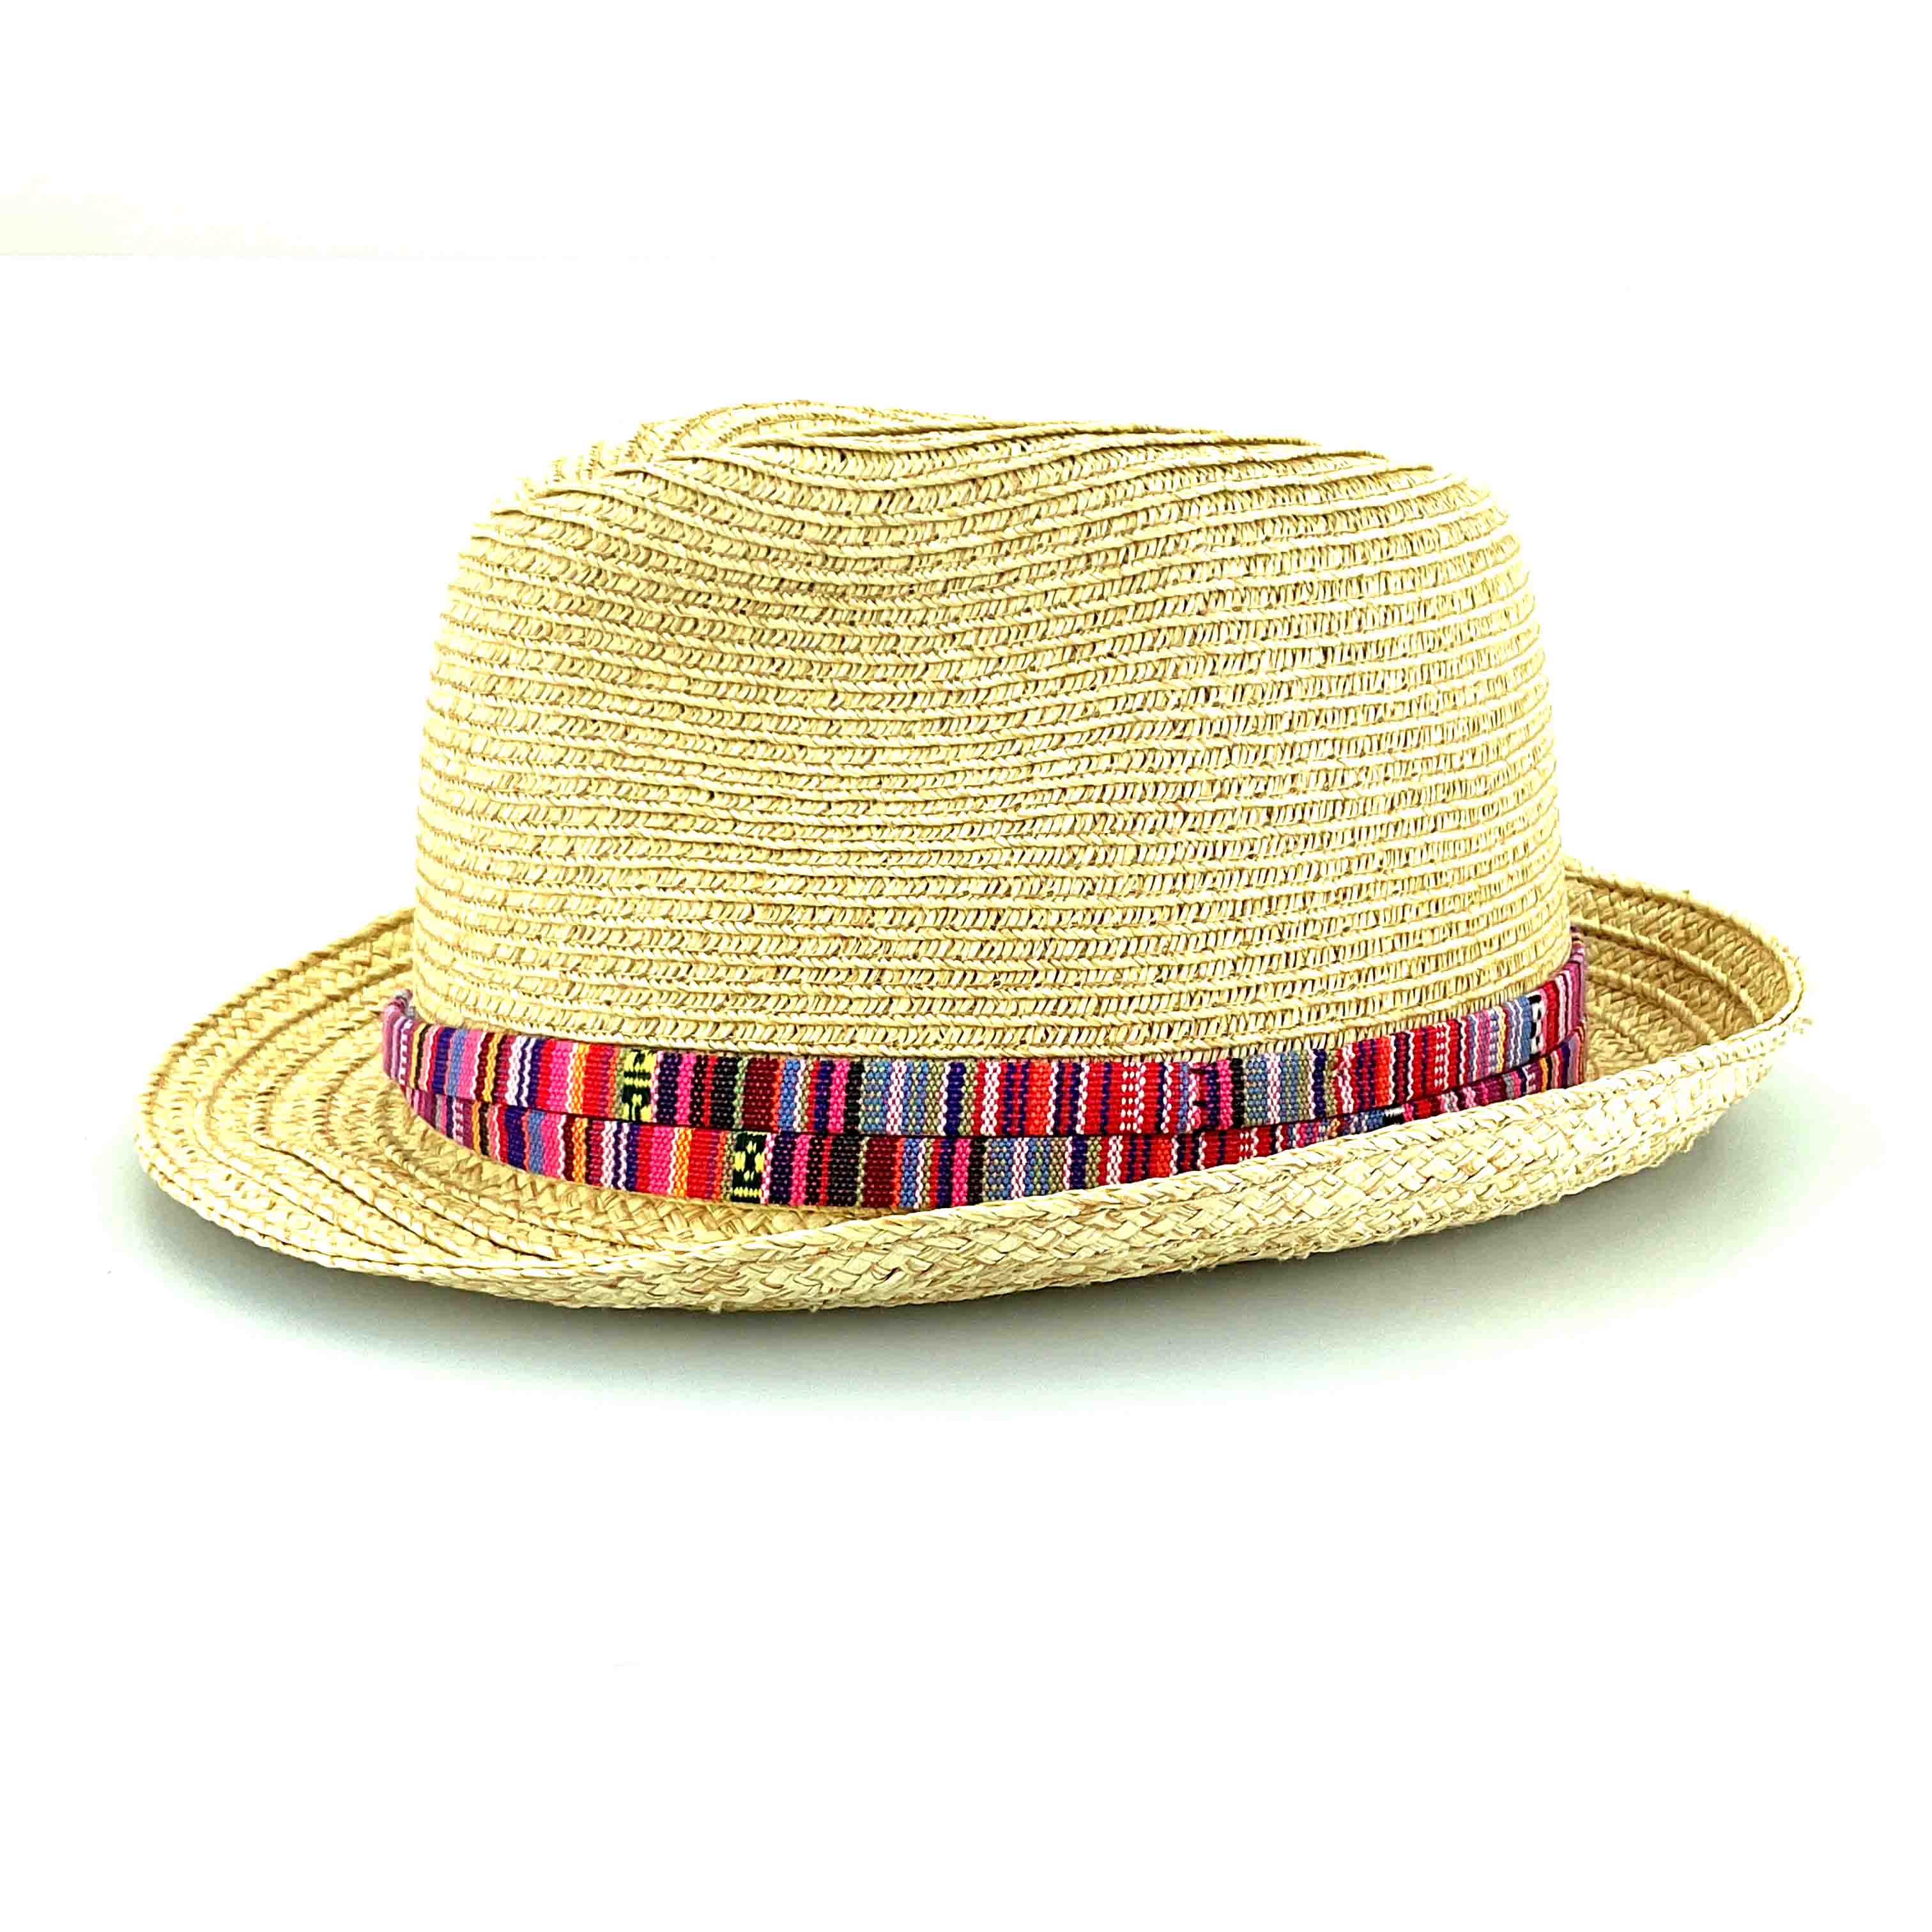 Petite Tribal Band Fedora for Small Heads - Sunny Dayz™ Hats Fedora Hat Sun N Sand Hats    